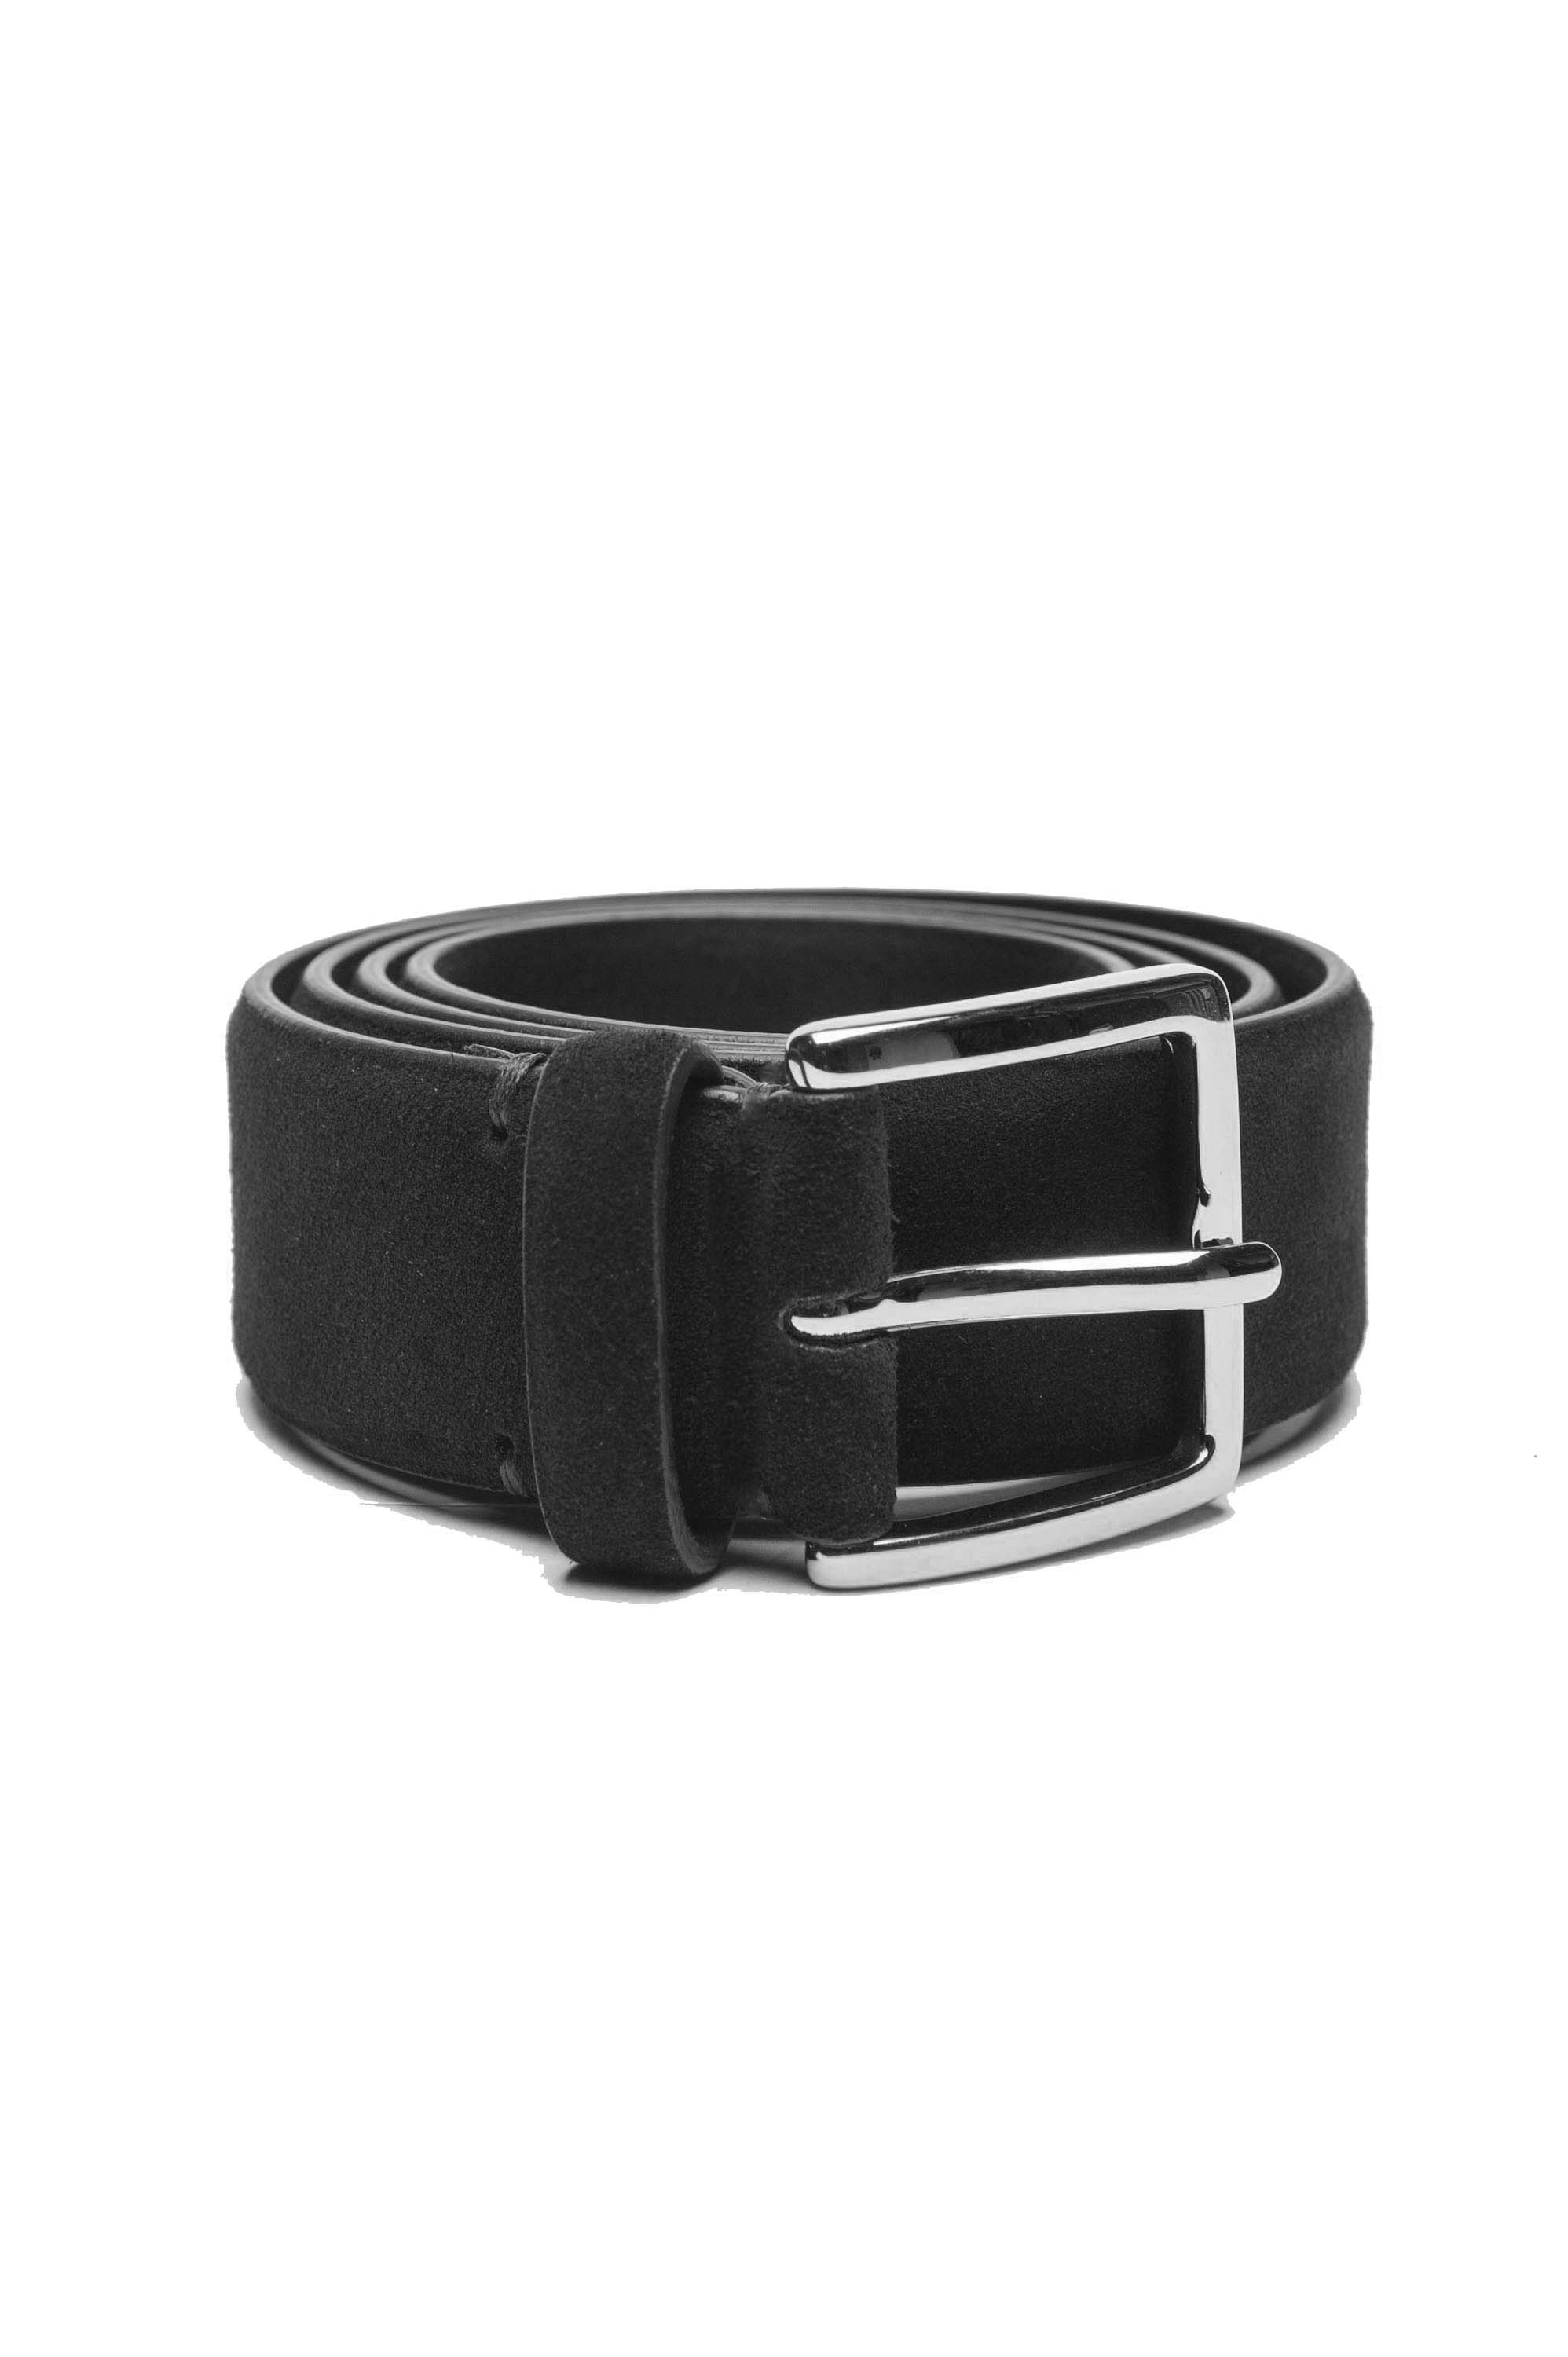 SBU 01240_19AW Classic belt in black suede leather 1.4 inches 01